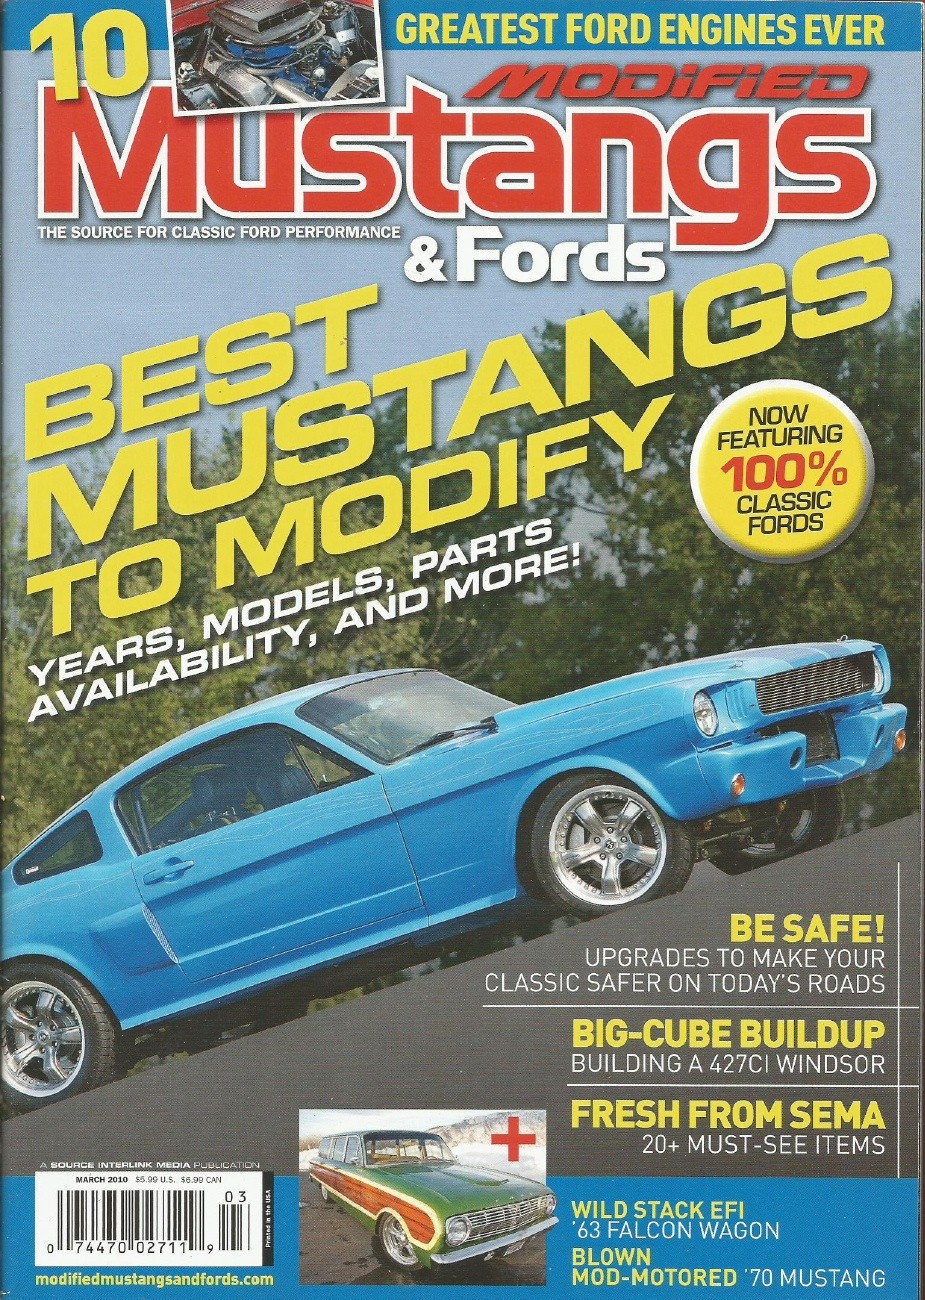 Modified Mustangs & Fords 2010 Mar - Greatest Ford Engines - Modified